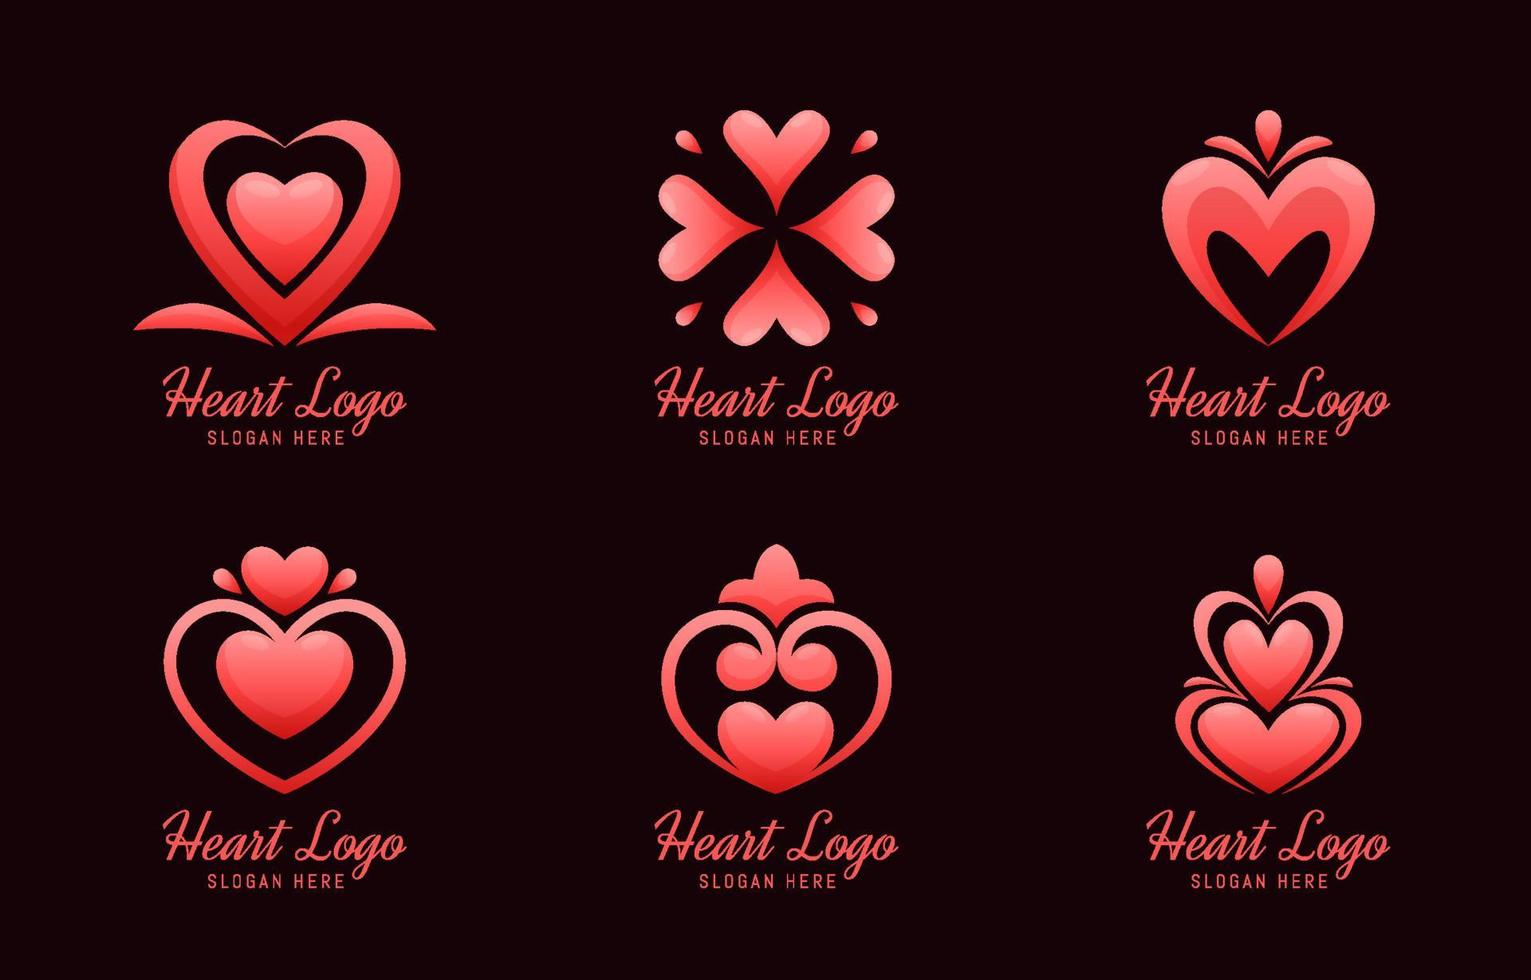 Heart Icon Sets Template vector